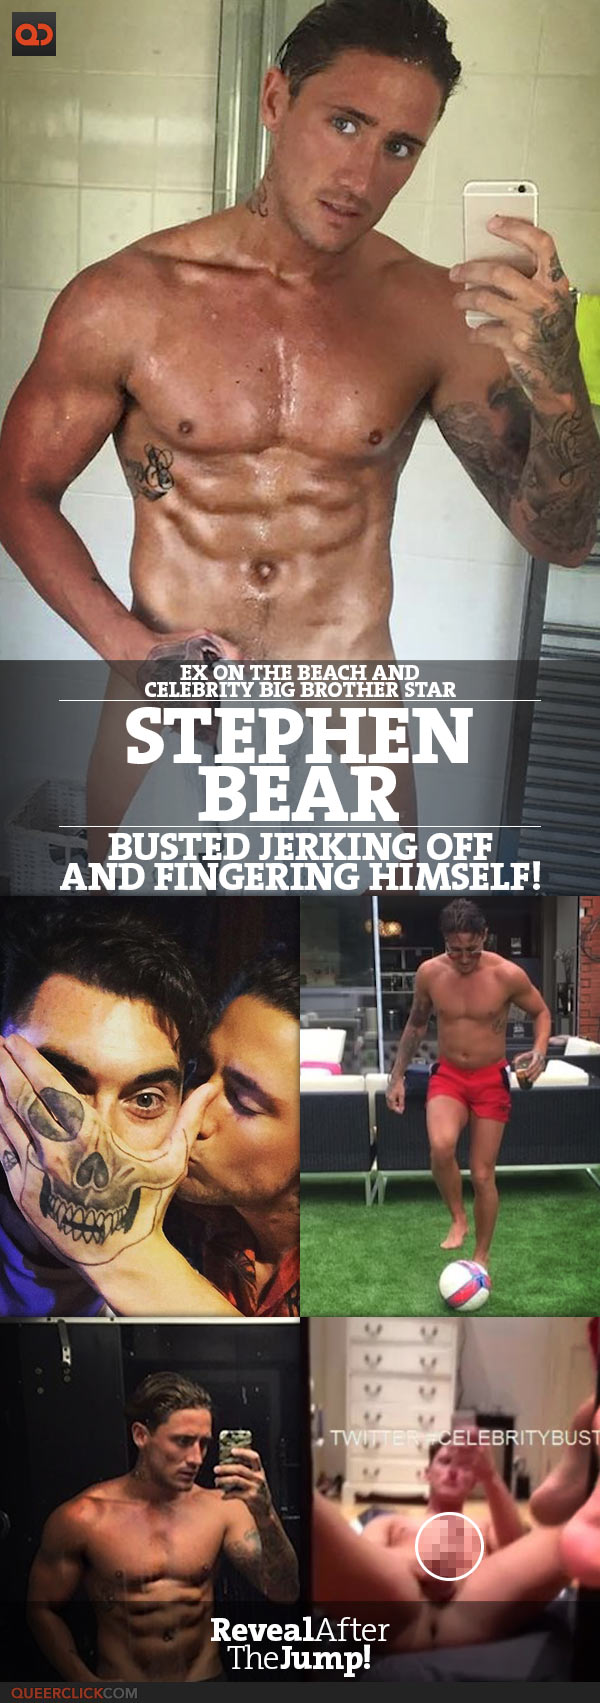 Beach Bear Porn - Stephen Bear, Ex On The Beach And Celebrity Big Brother Star, Busted  Jerking Off And Fingering Himself! - QueerClick